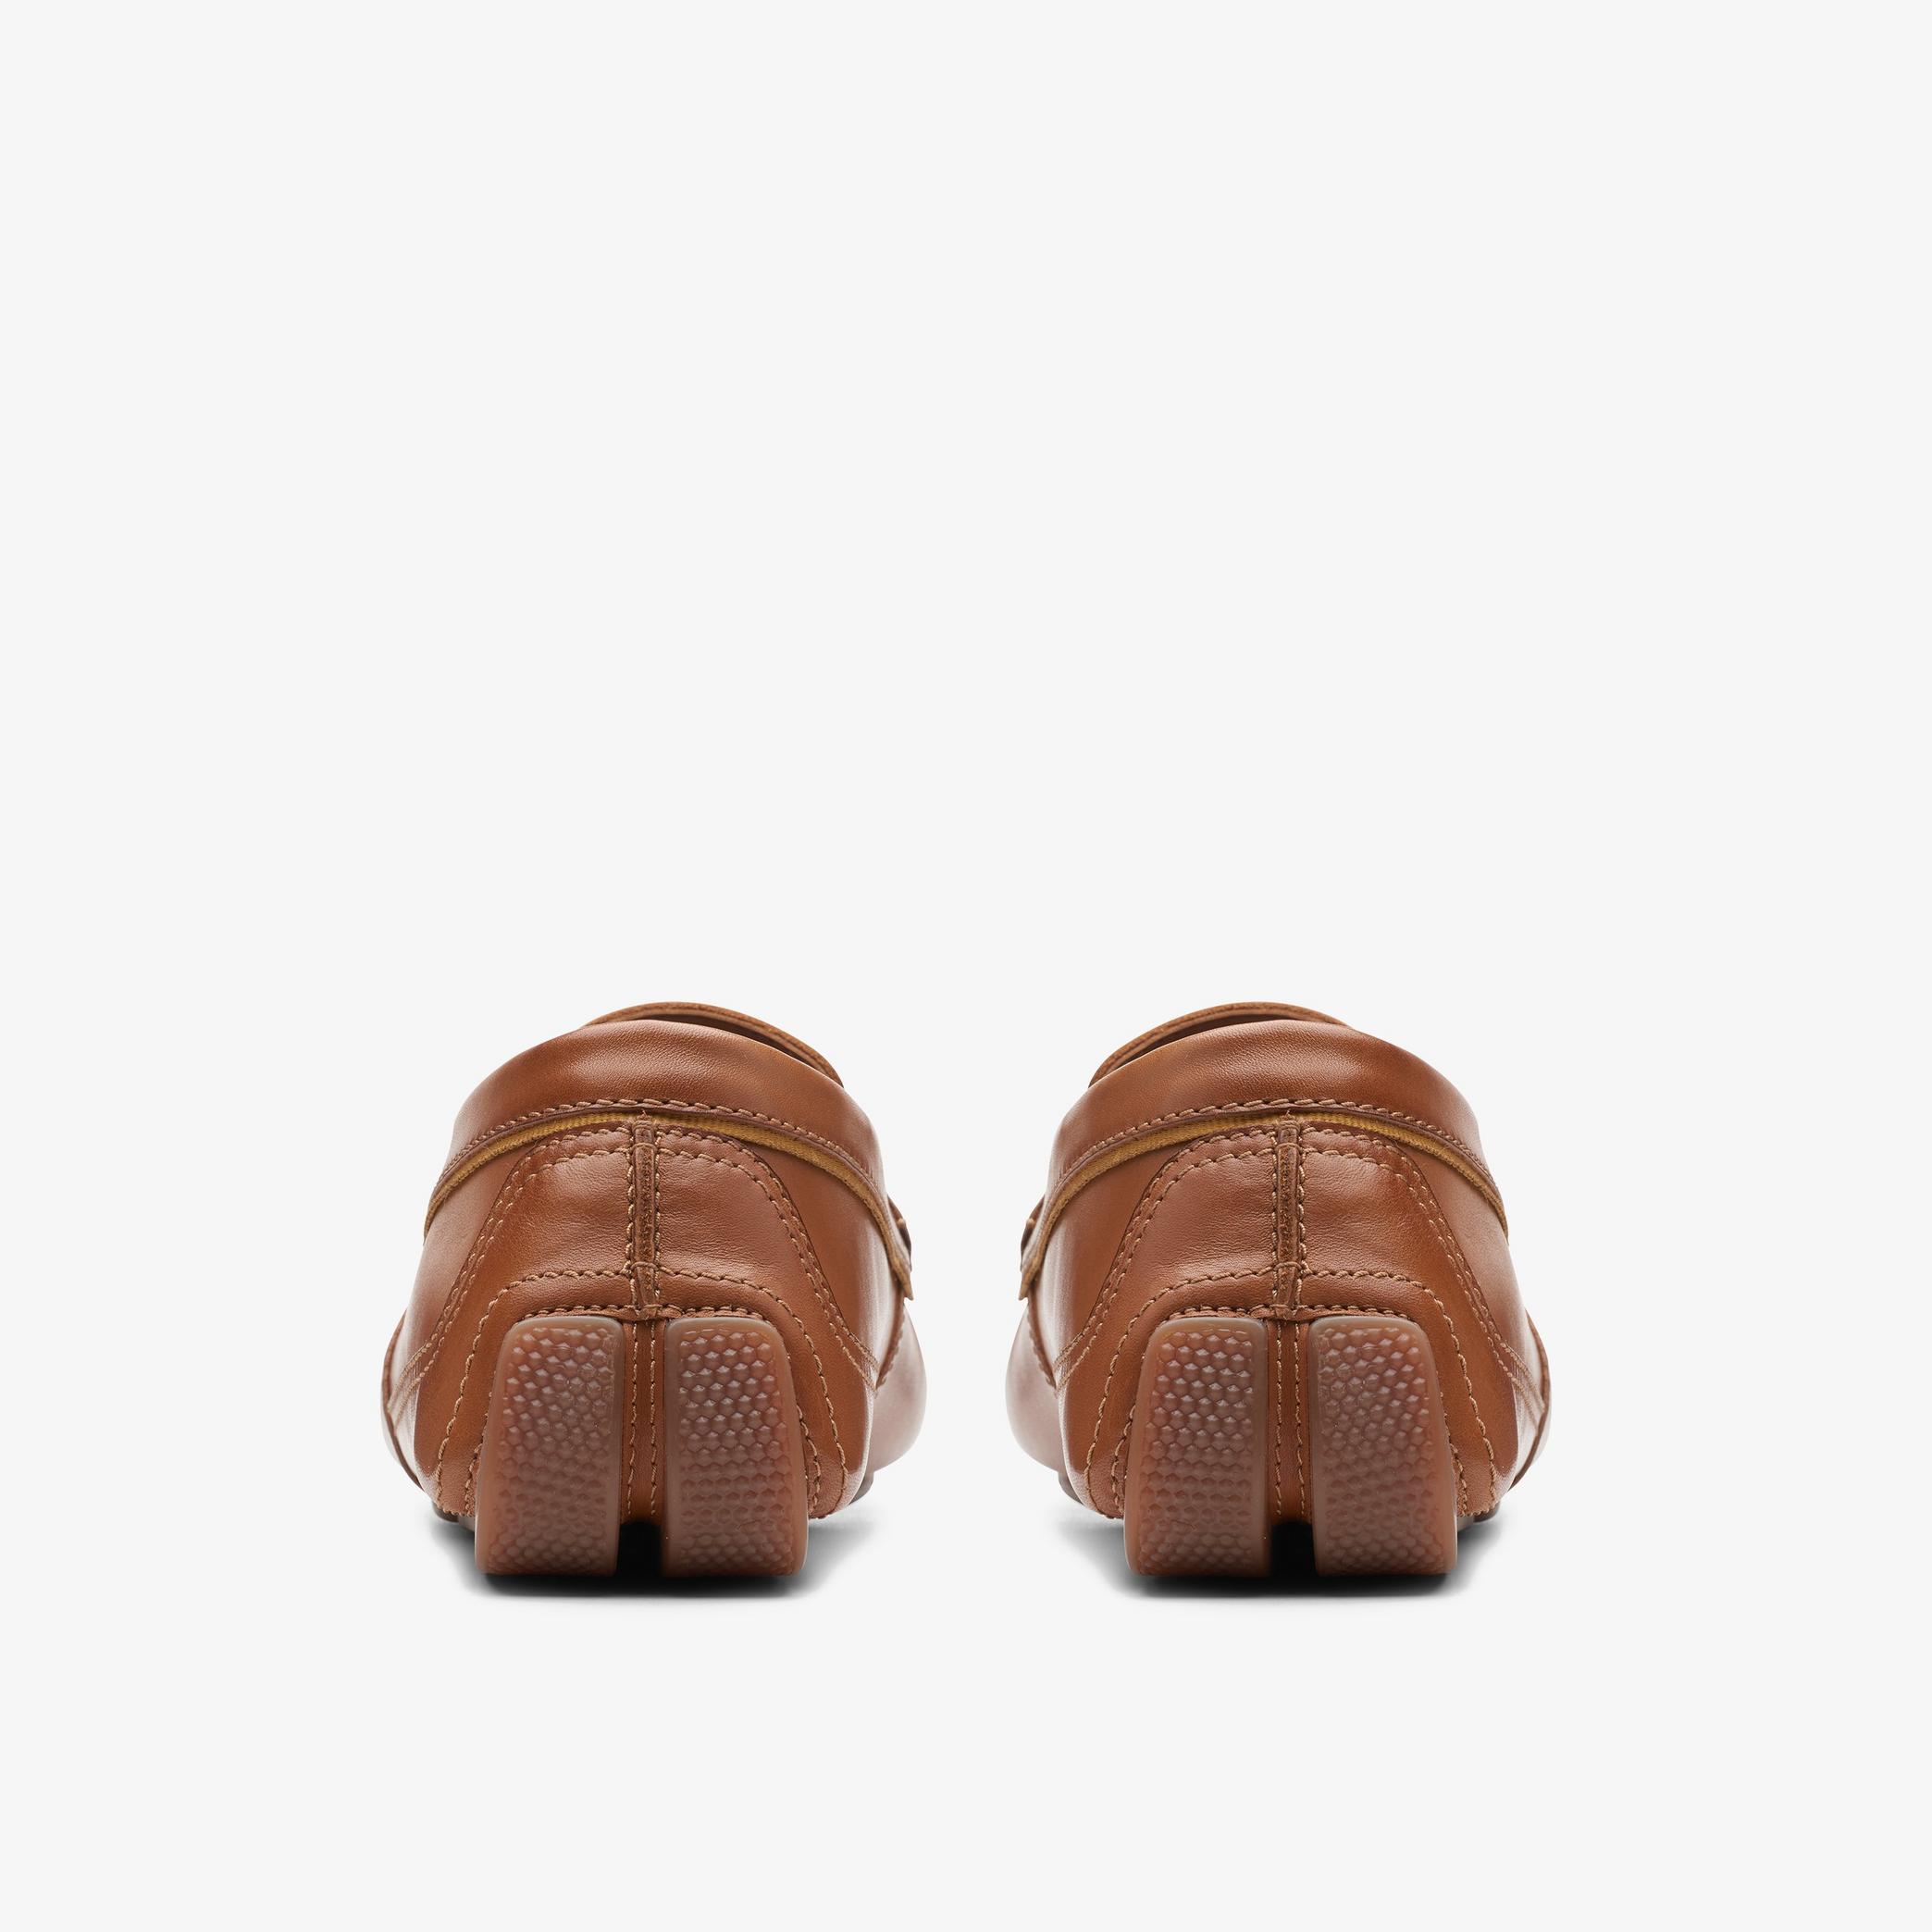 Markman Plain Tan Leather Loafers, view 5 of 6